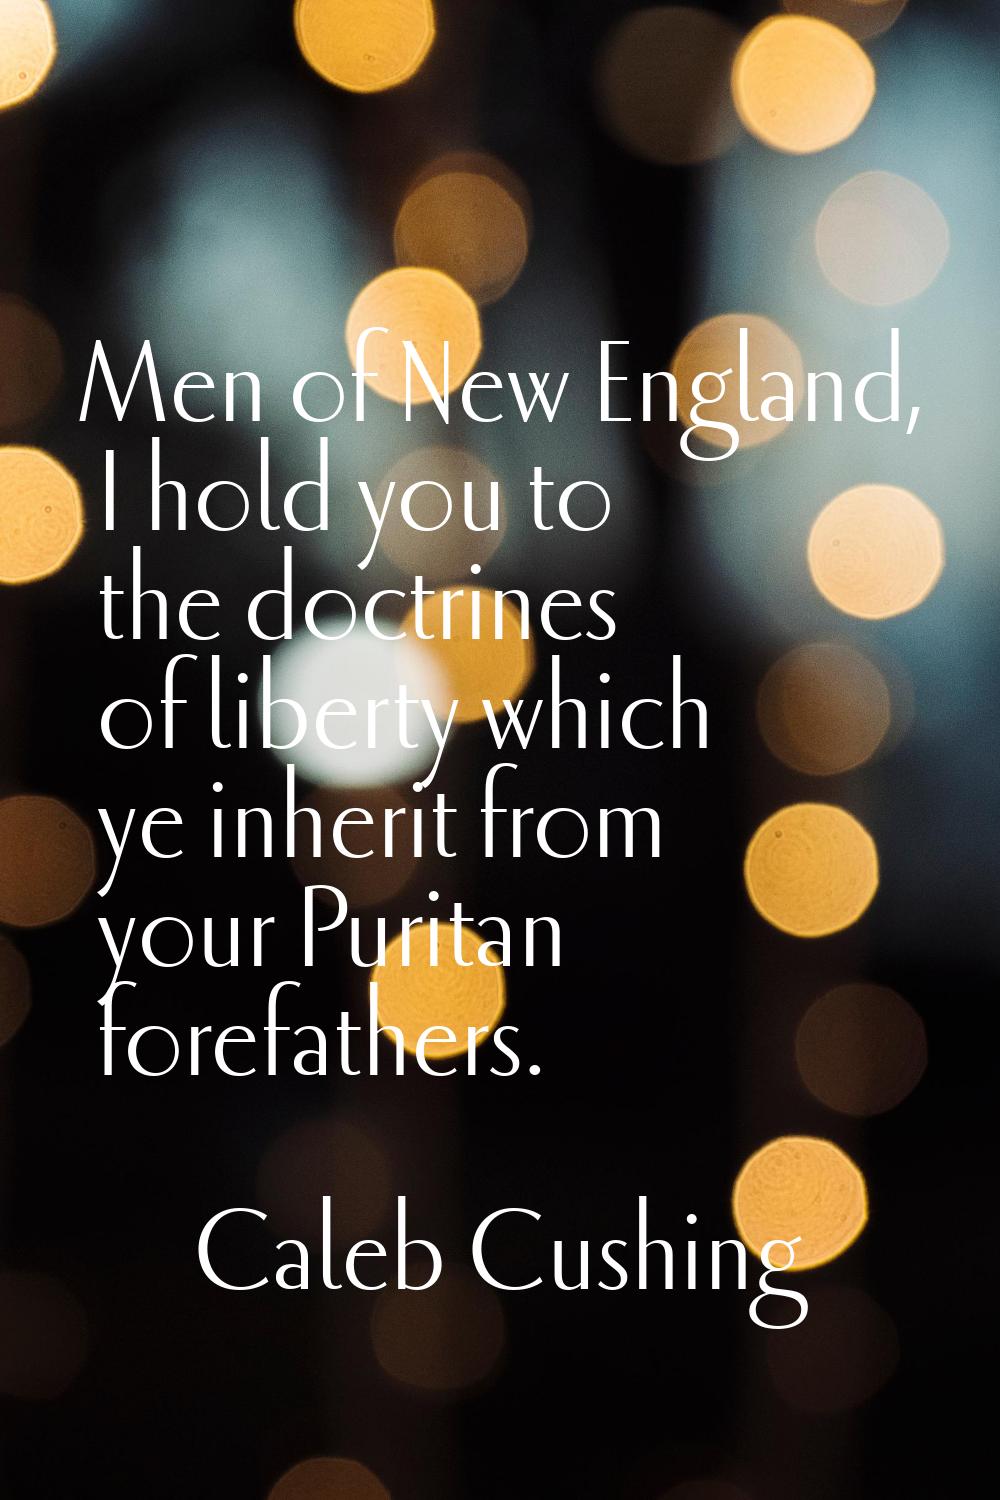 Men of New England, I hold you to the doctrines of liberty which ye inherit from your Puritan foref